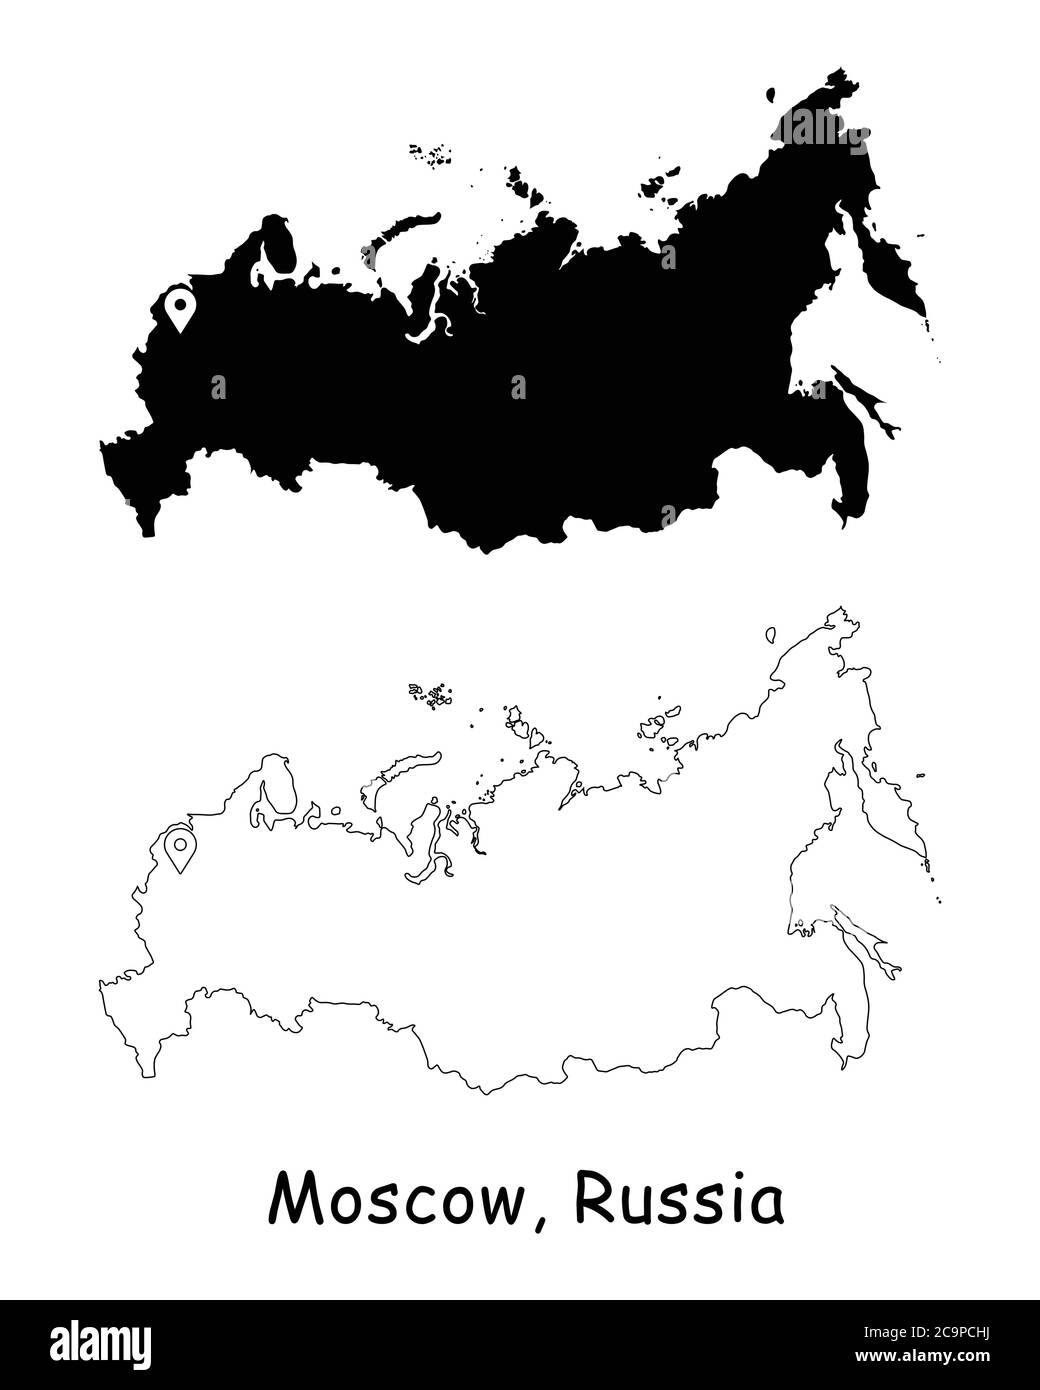 Moscow, Russia. Detailed Country Map with Location Pin on Capital City. Black silhouette and outline maps isolated on white background. EPS Vector Stock Vector